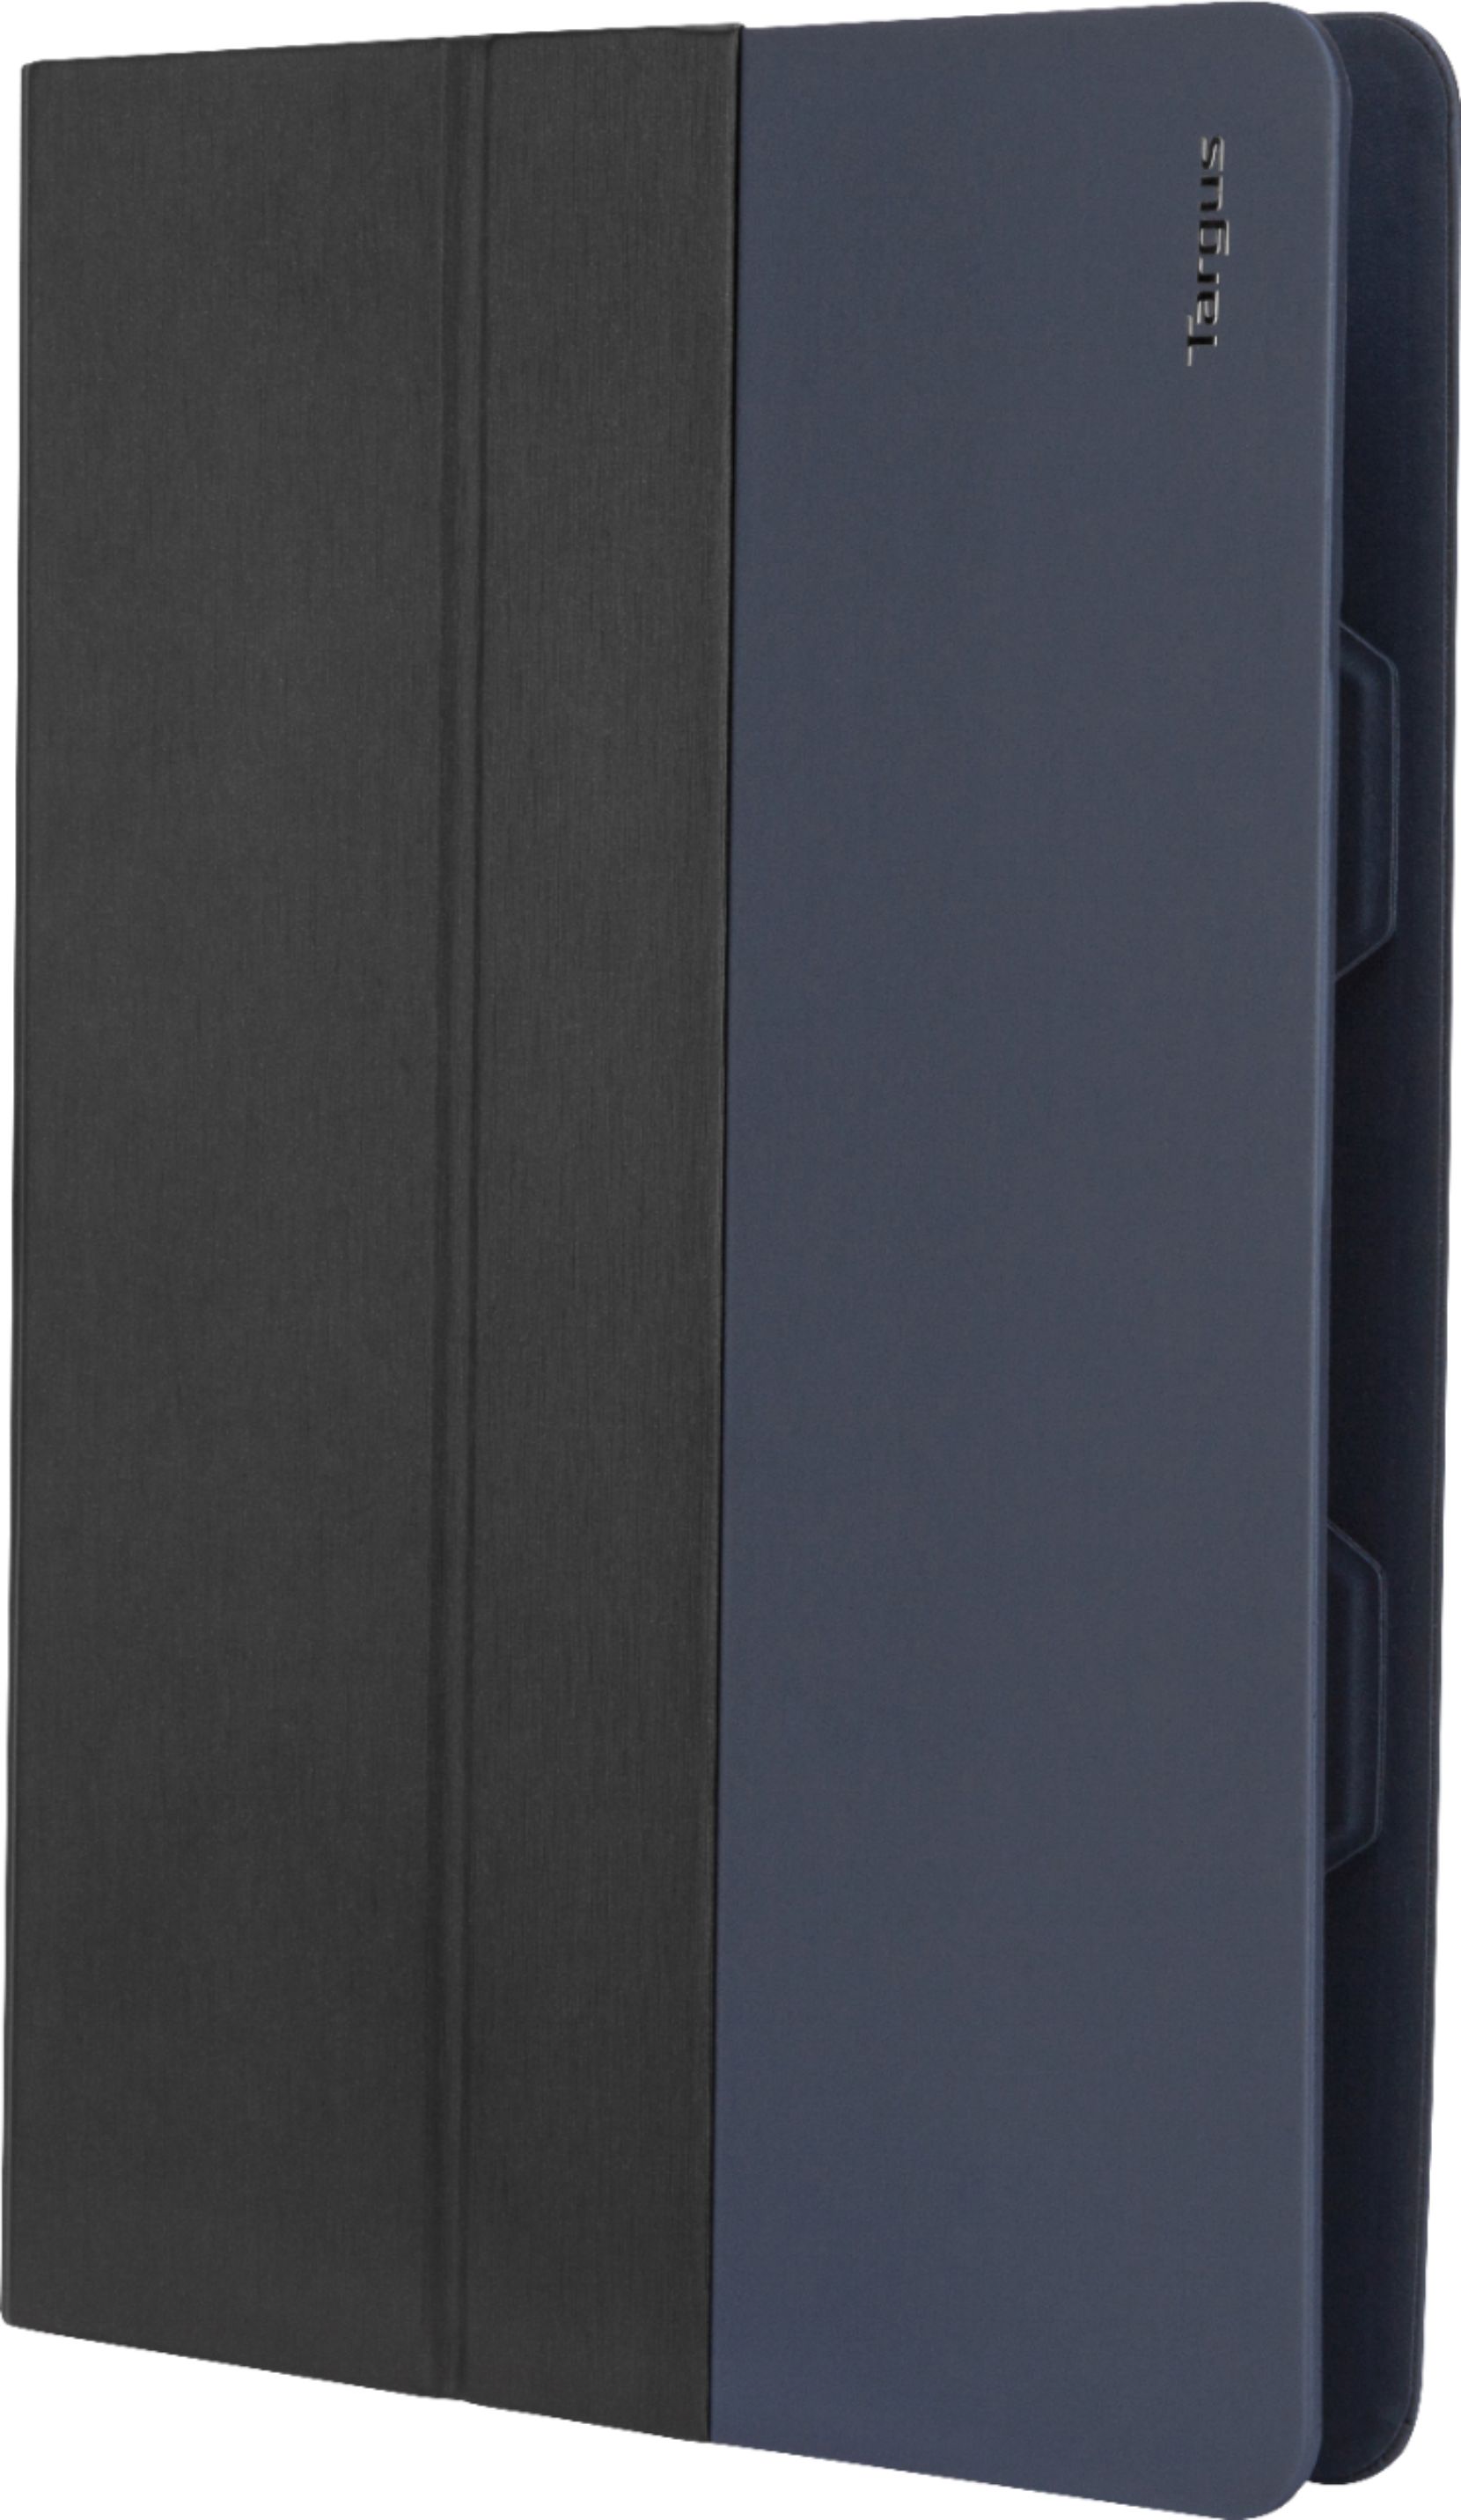 Angle View: Targus - Fit-N-Grip Folio Case for Most 10" Tablets - Black